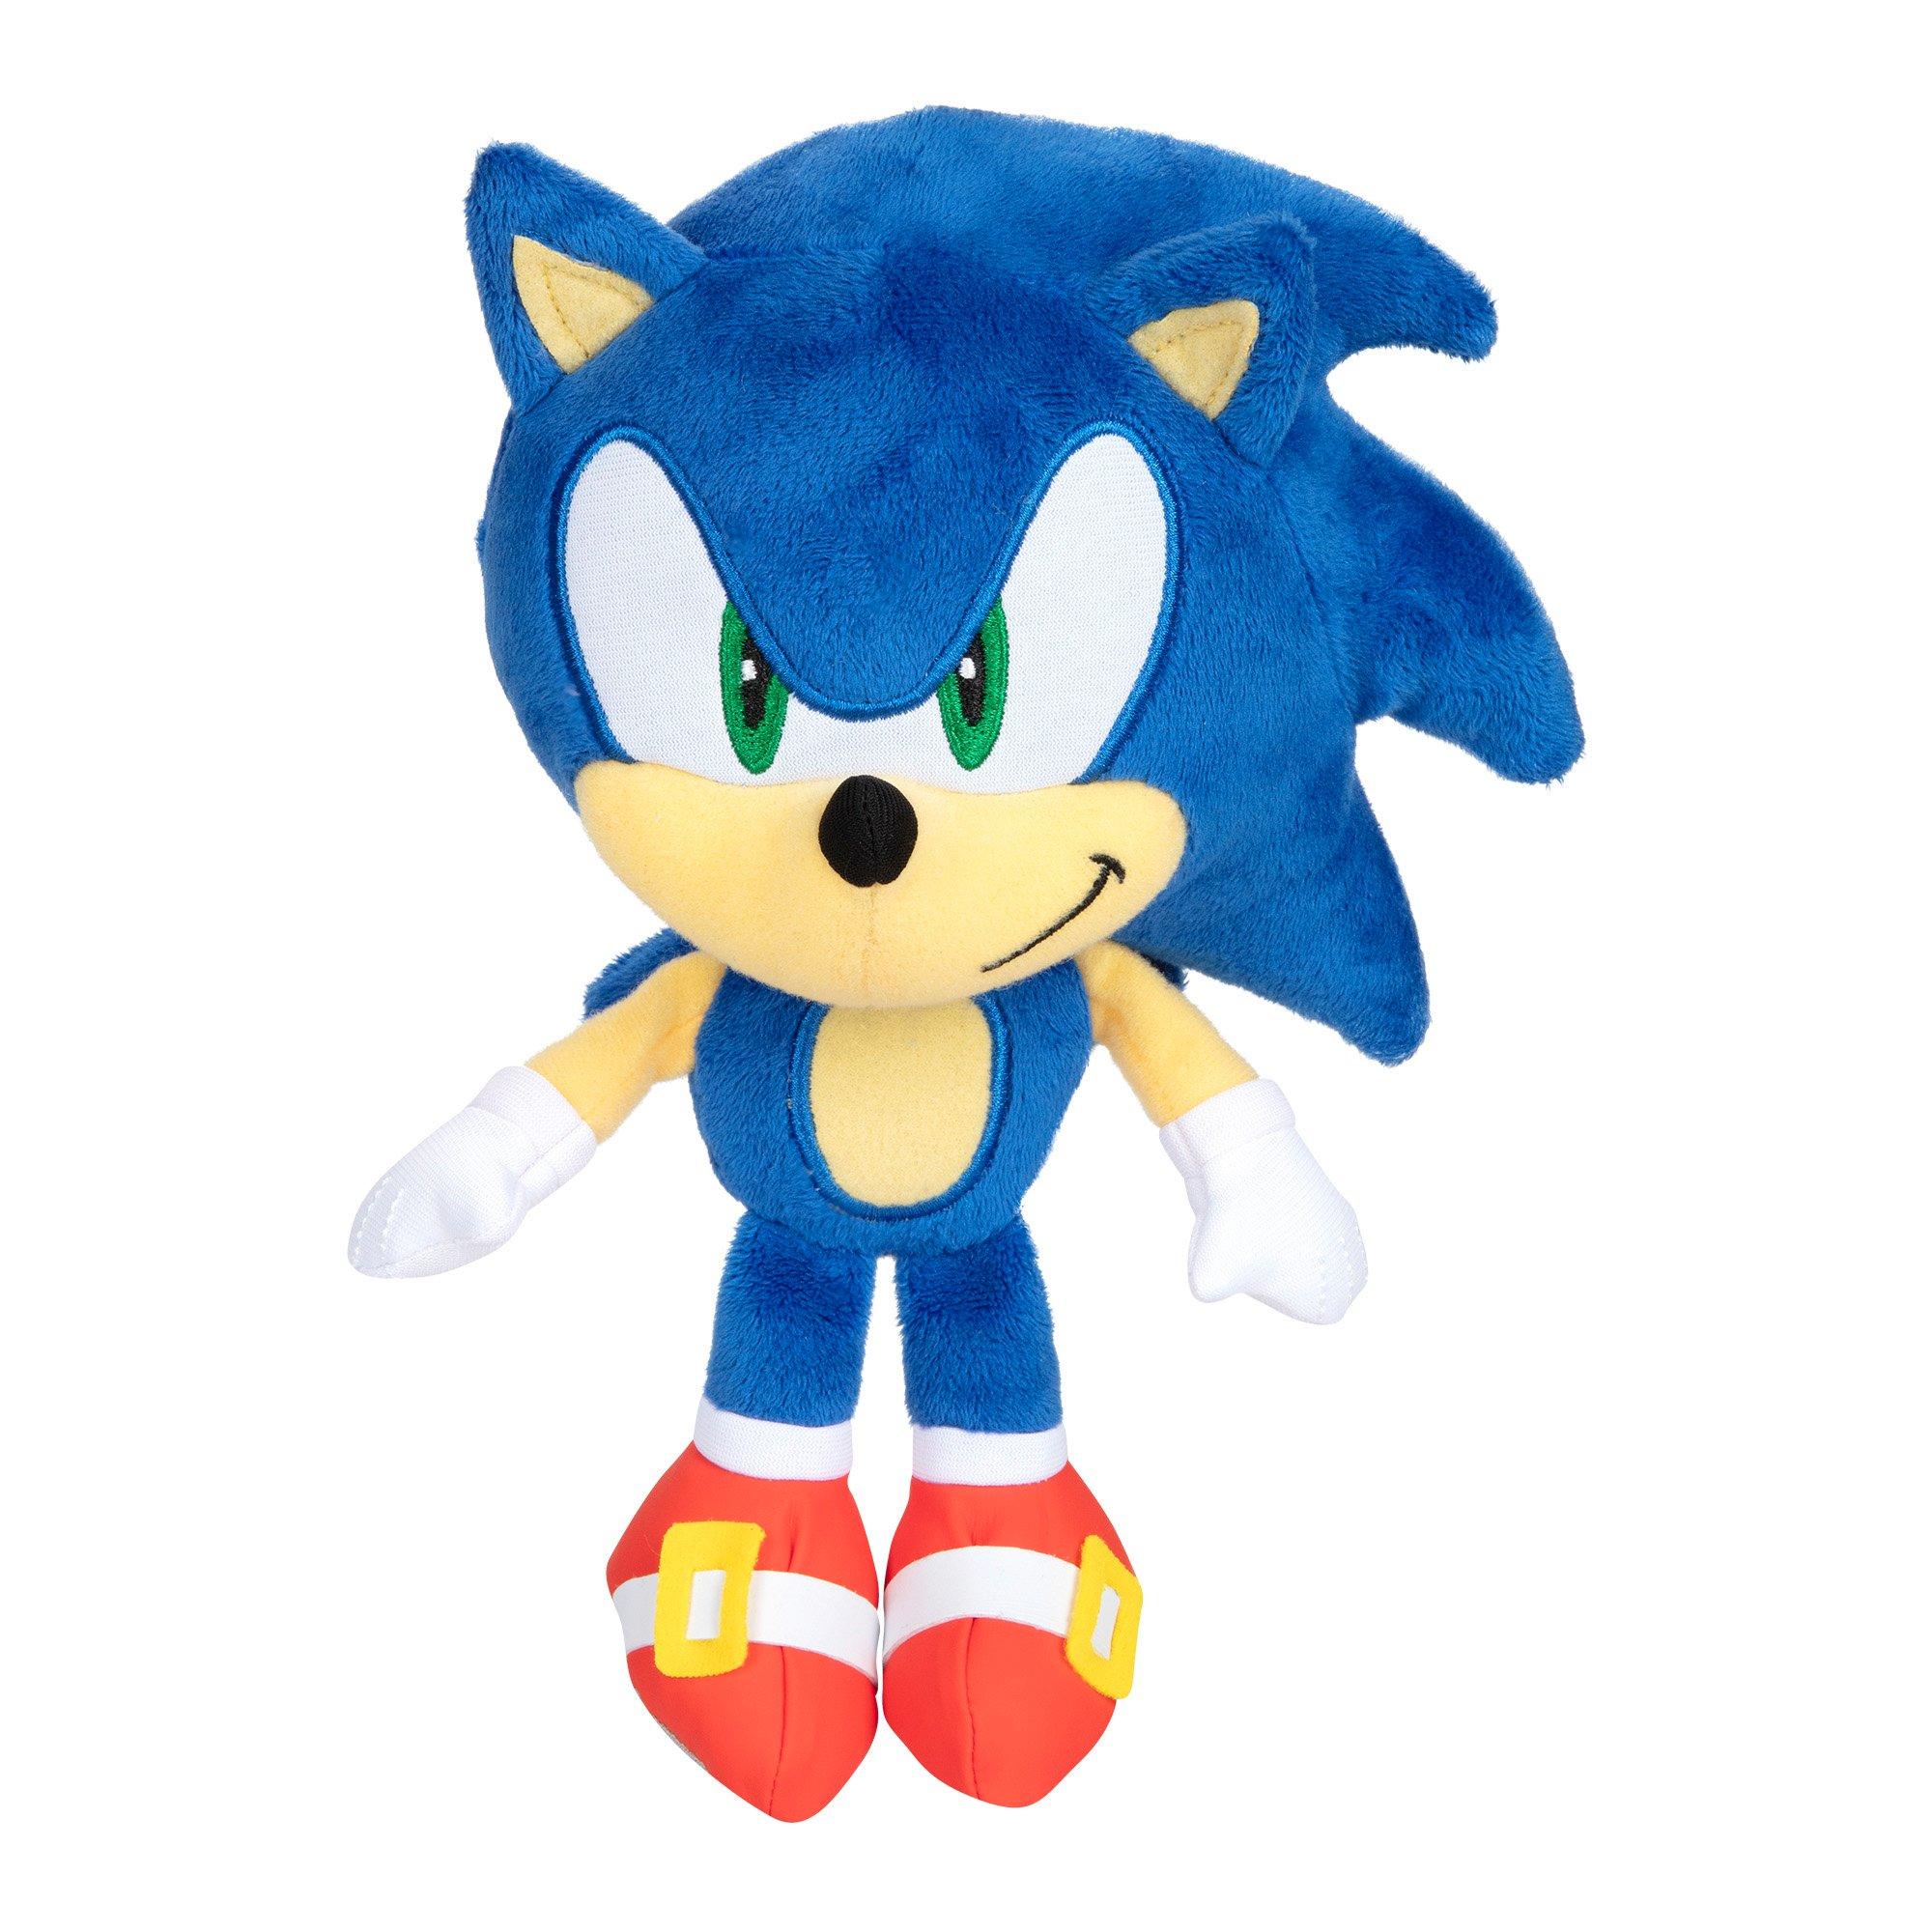  Sonic Plush, 15 Hyper Sonic Plushie Toys for Fans Gift, Collectible Stuffed Figure Doll for Kids and Adults